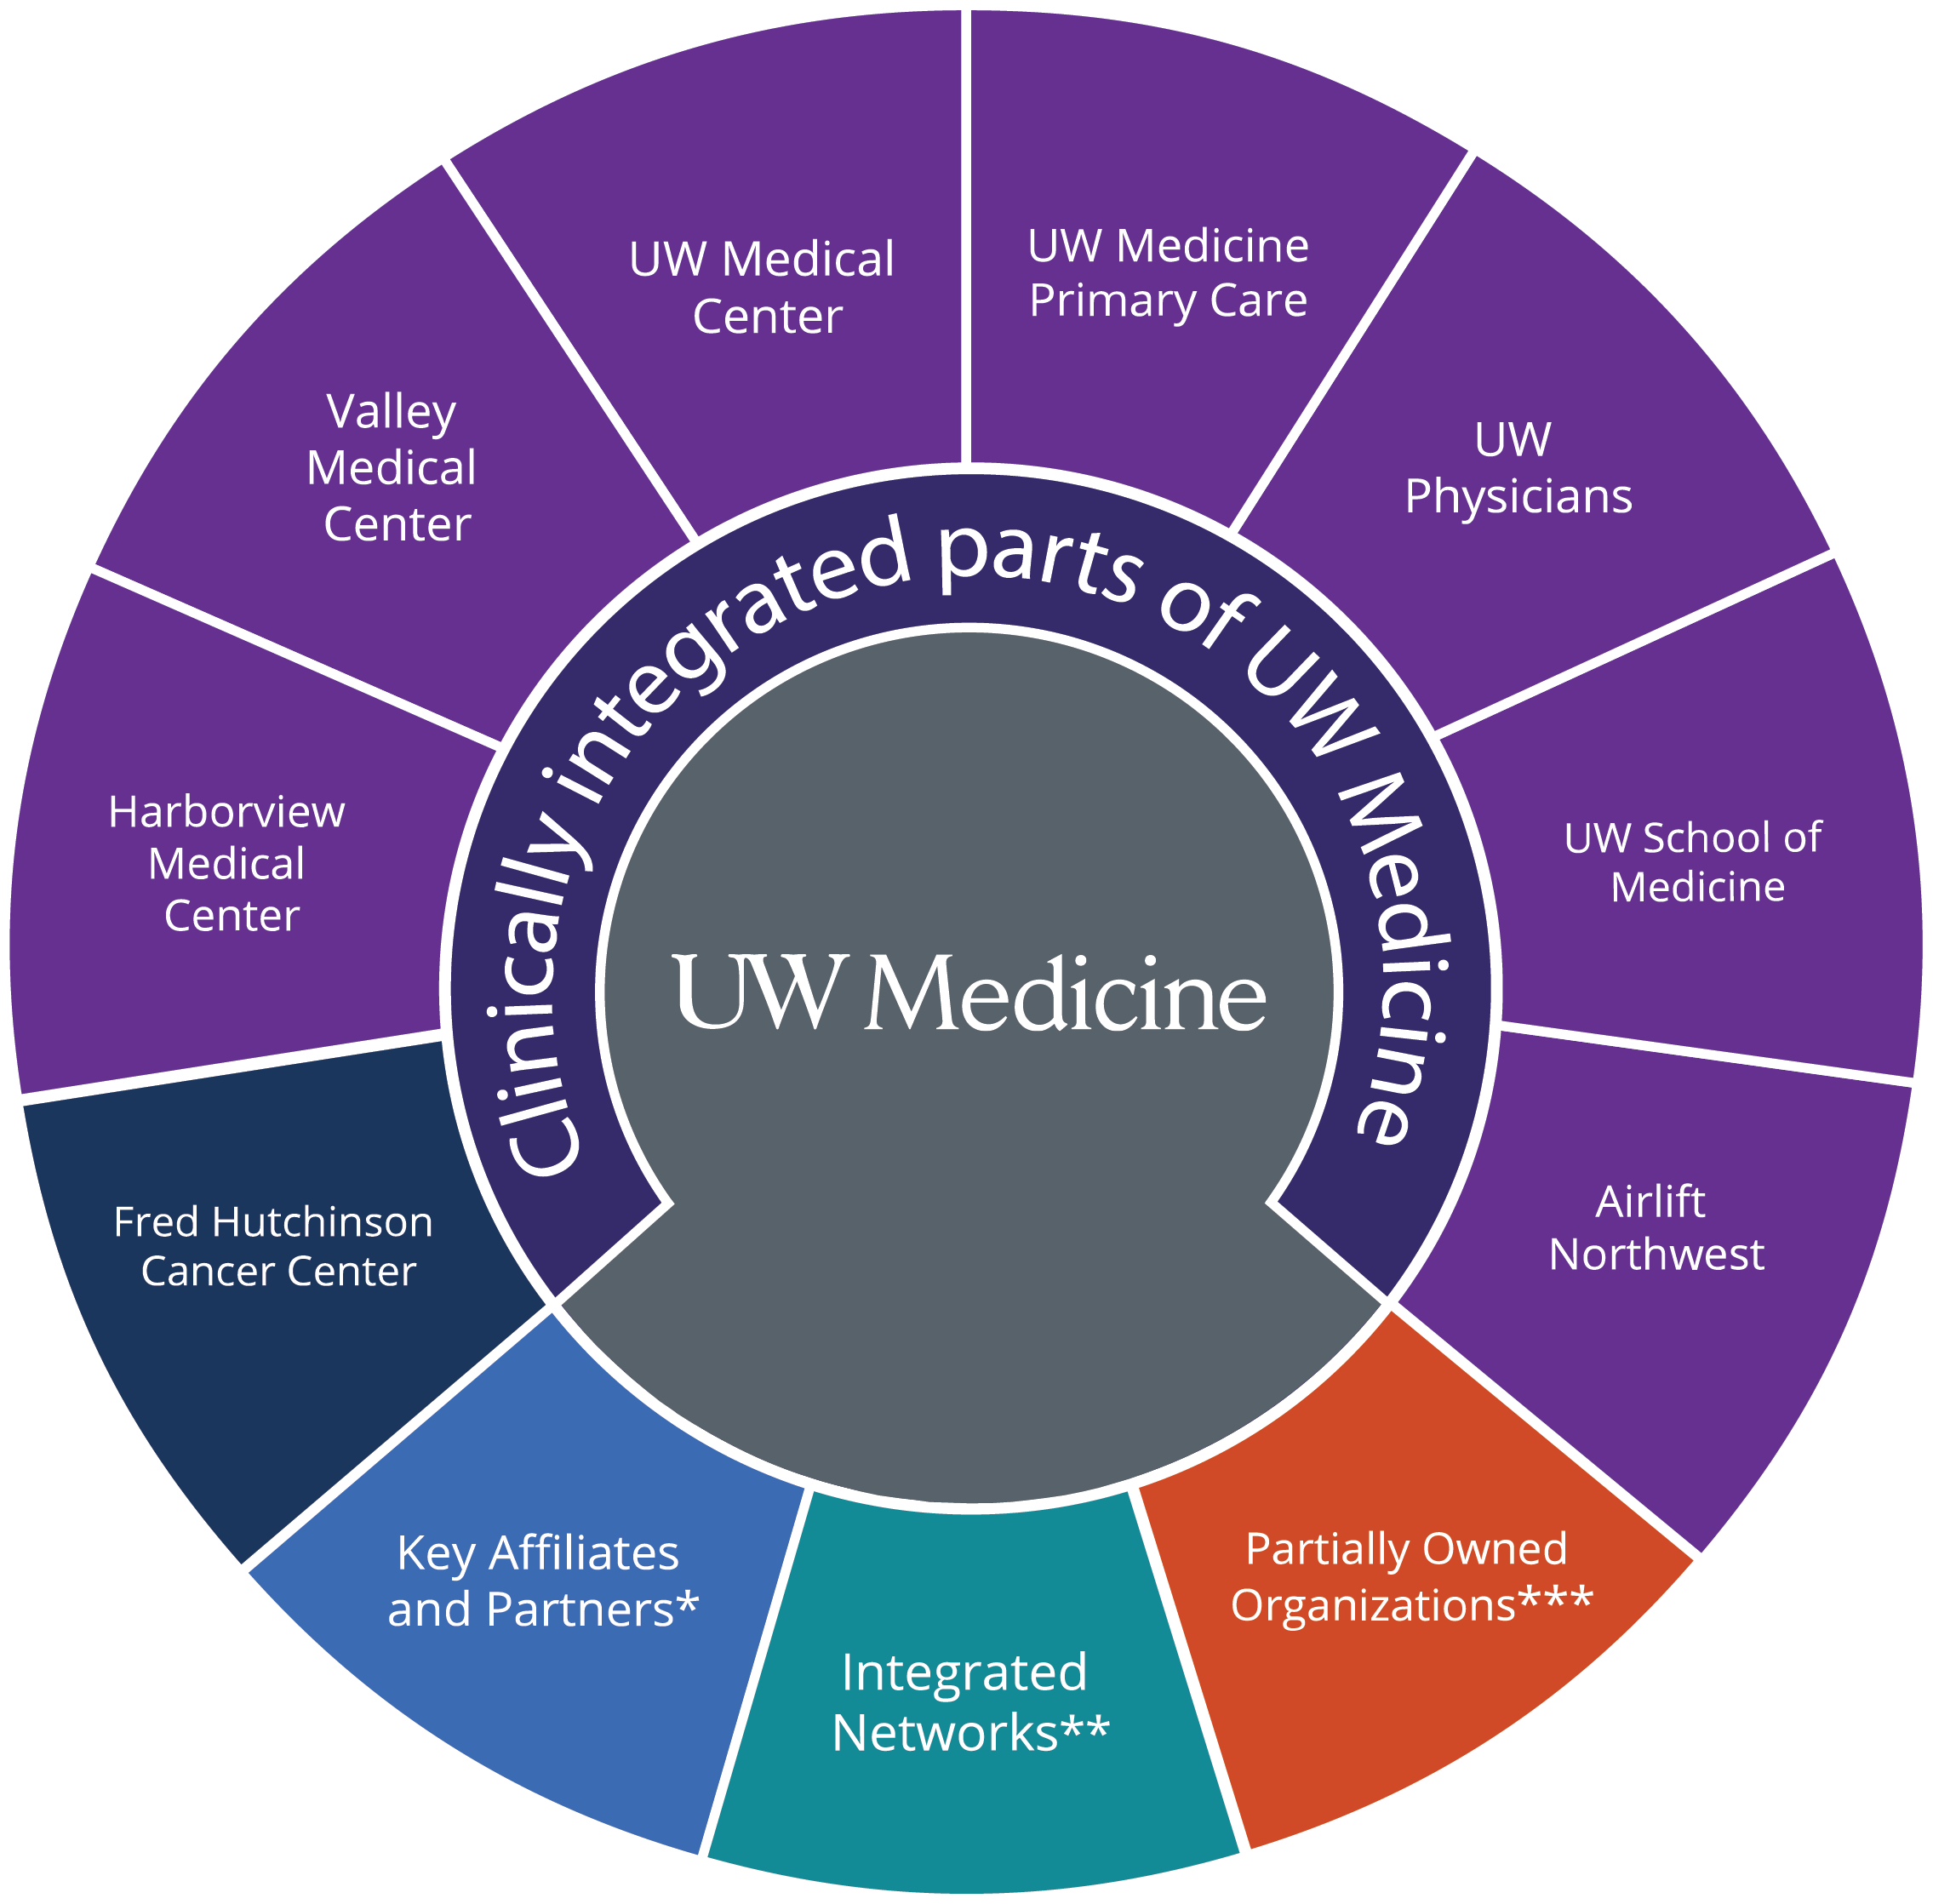 A graphical wheel that conveys the relationship between UW Medicine and its family of organizations that are operated or managed as part of an integrated health system; see below for a list of organizations